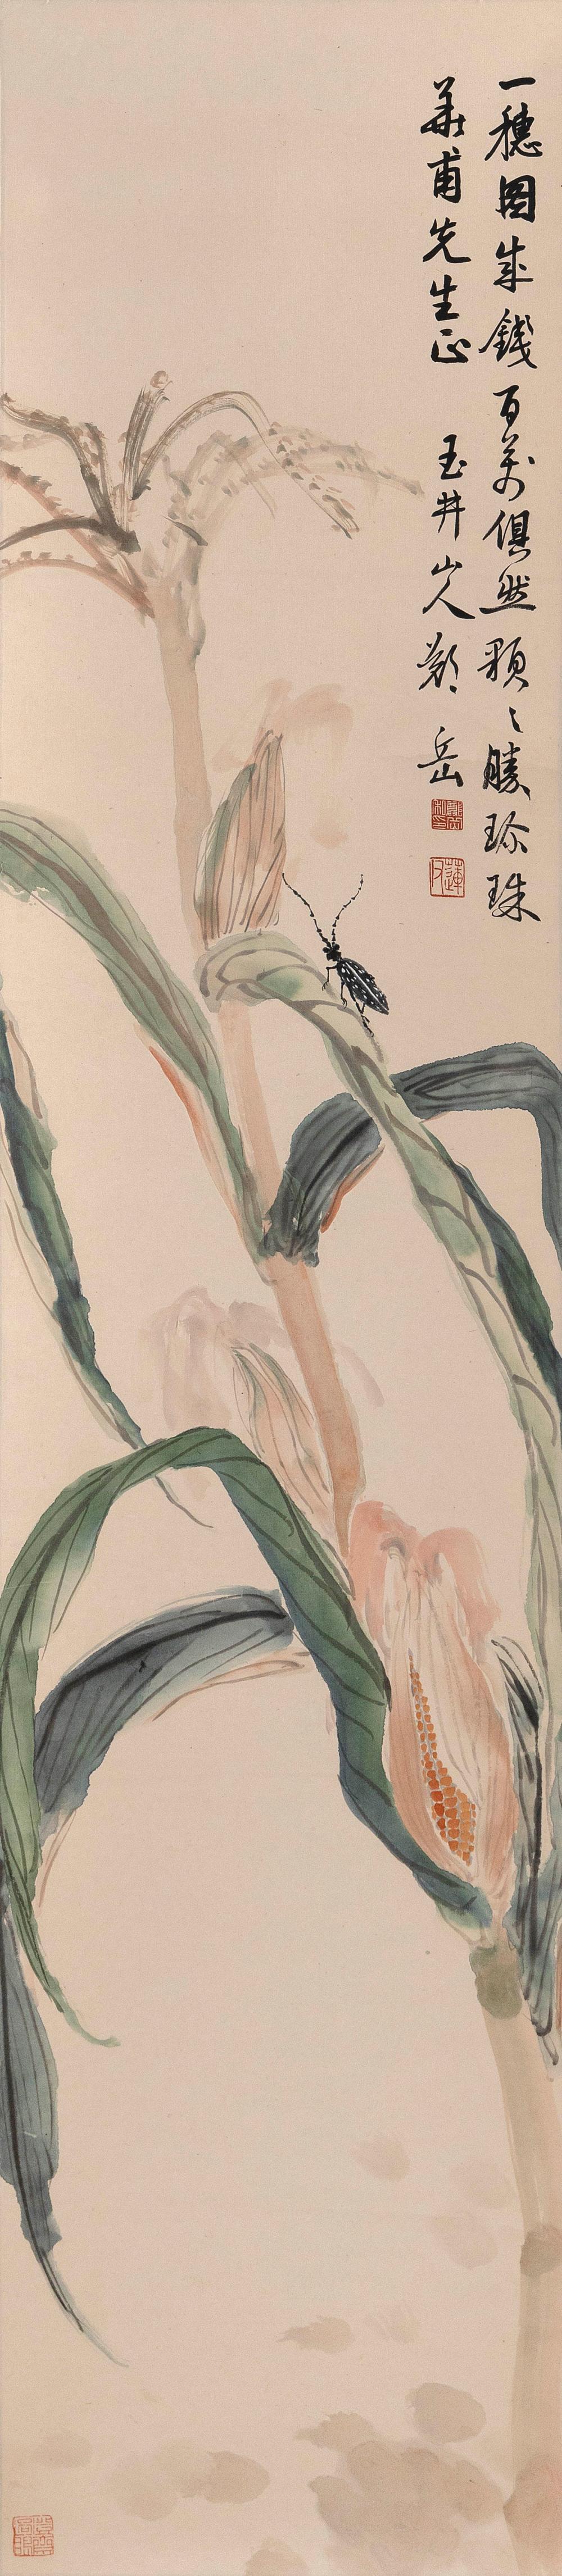 CHINESE SCROLL PAINTING ON PAPER 34e03a